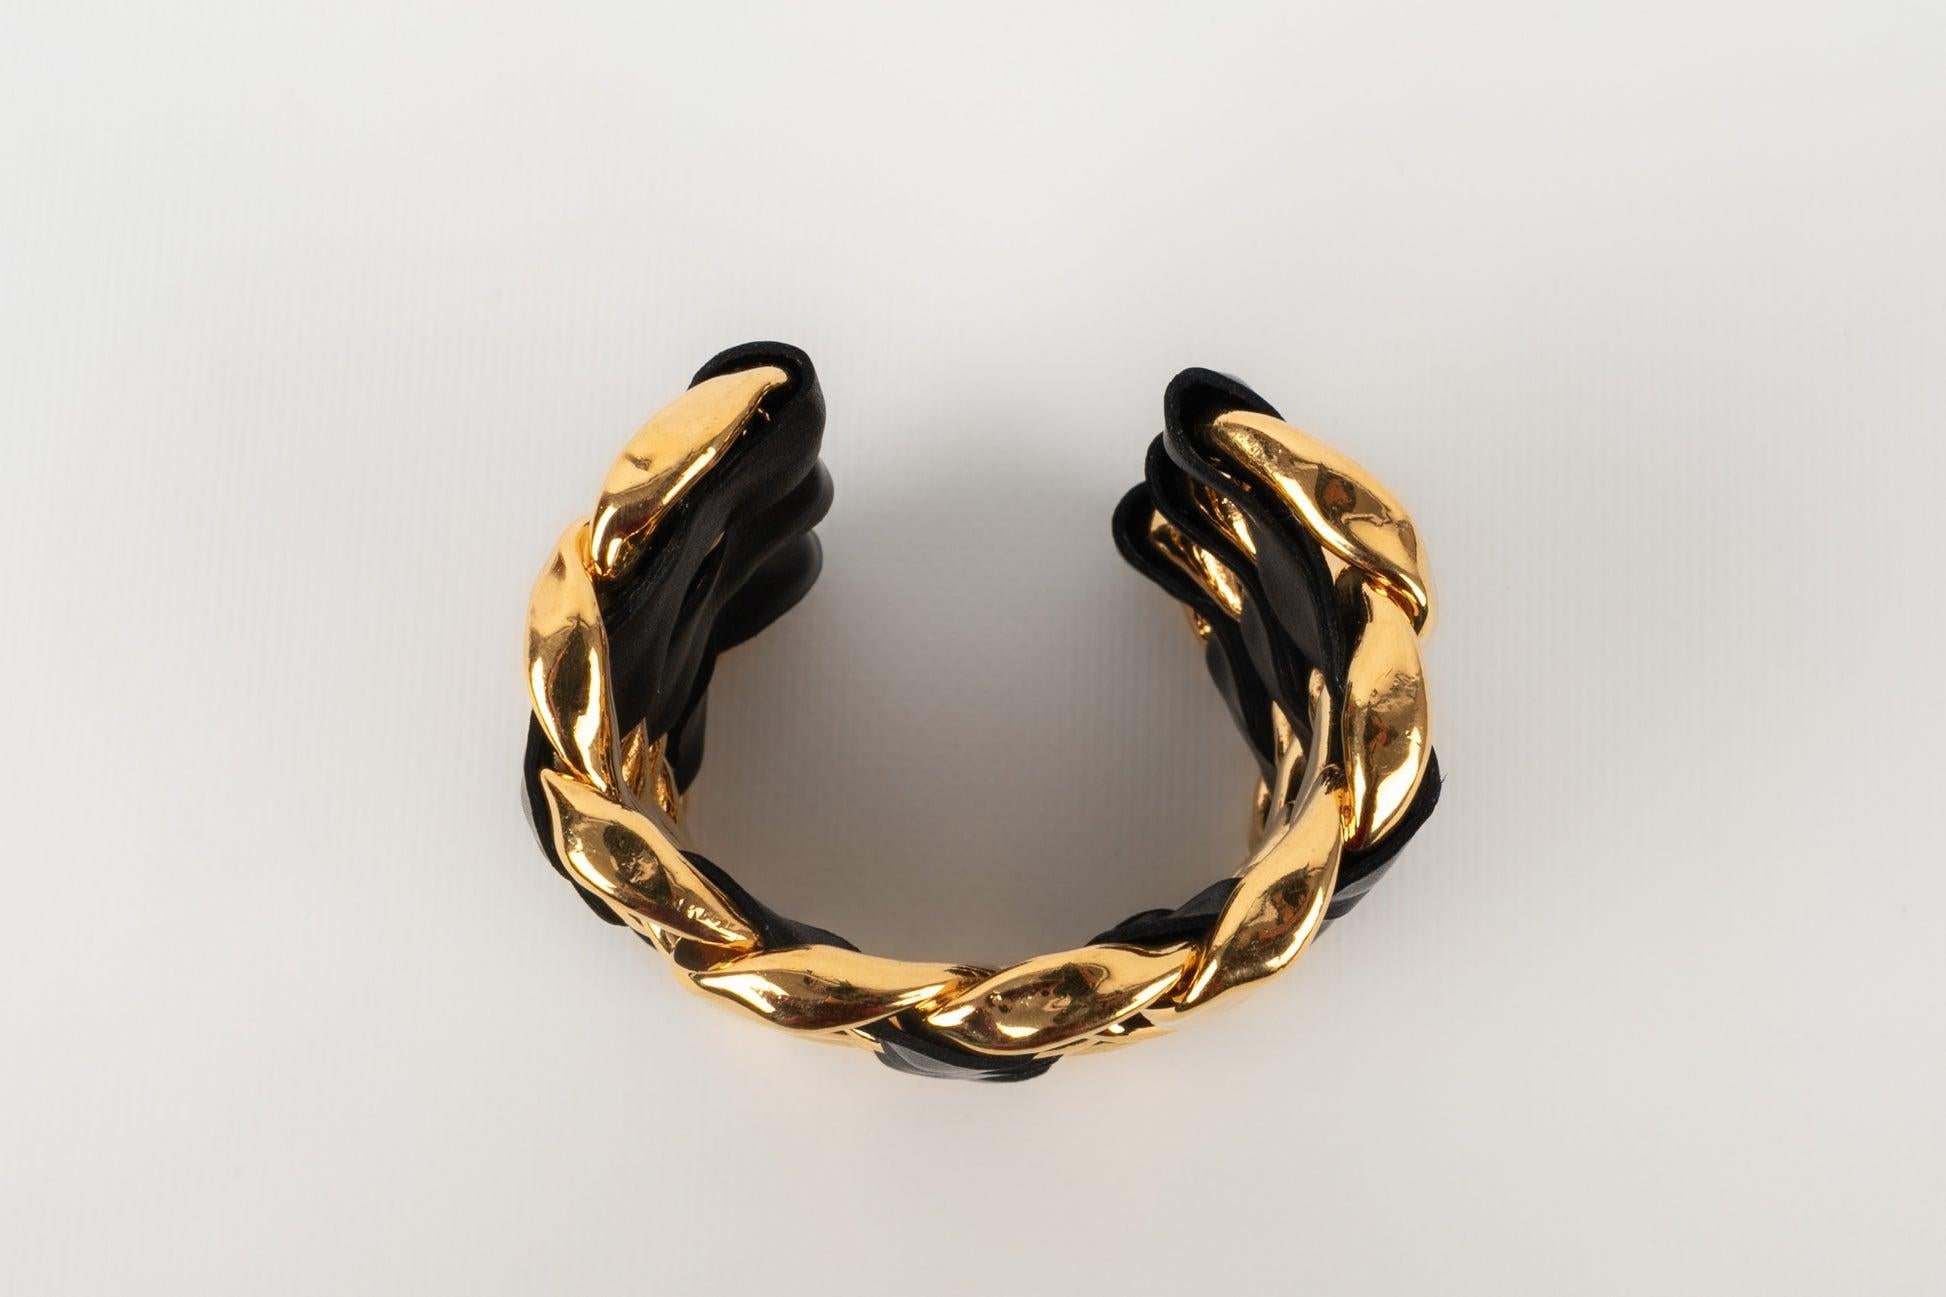 Chanel Cuff Bracelet in Golden Metal with Black Leather, 1980s In Excellent Condition For Sale In SAINT-OUEN-SUR-SEINE, FR